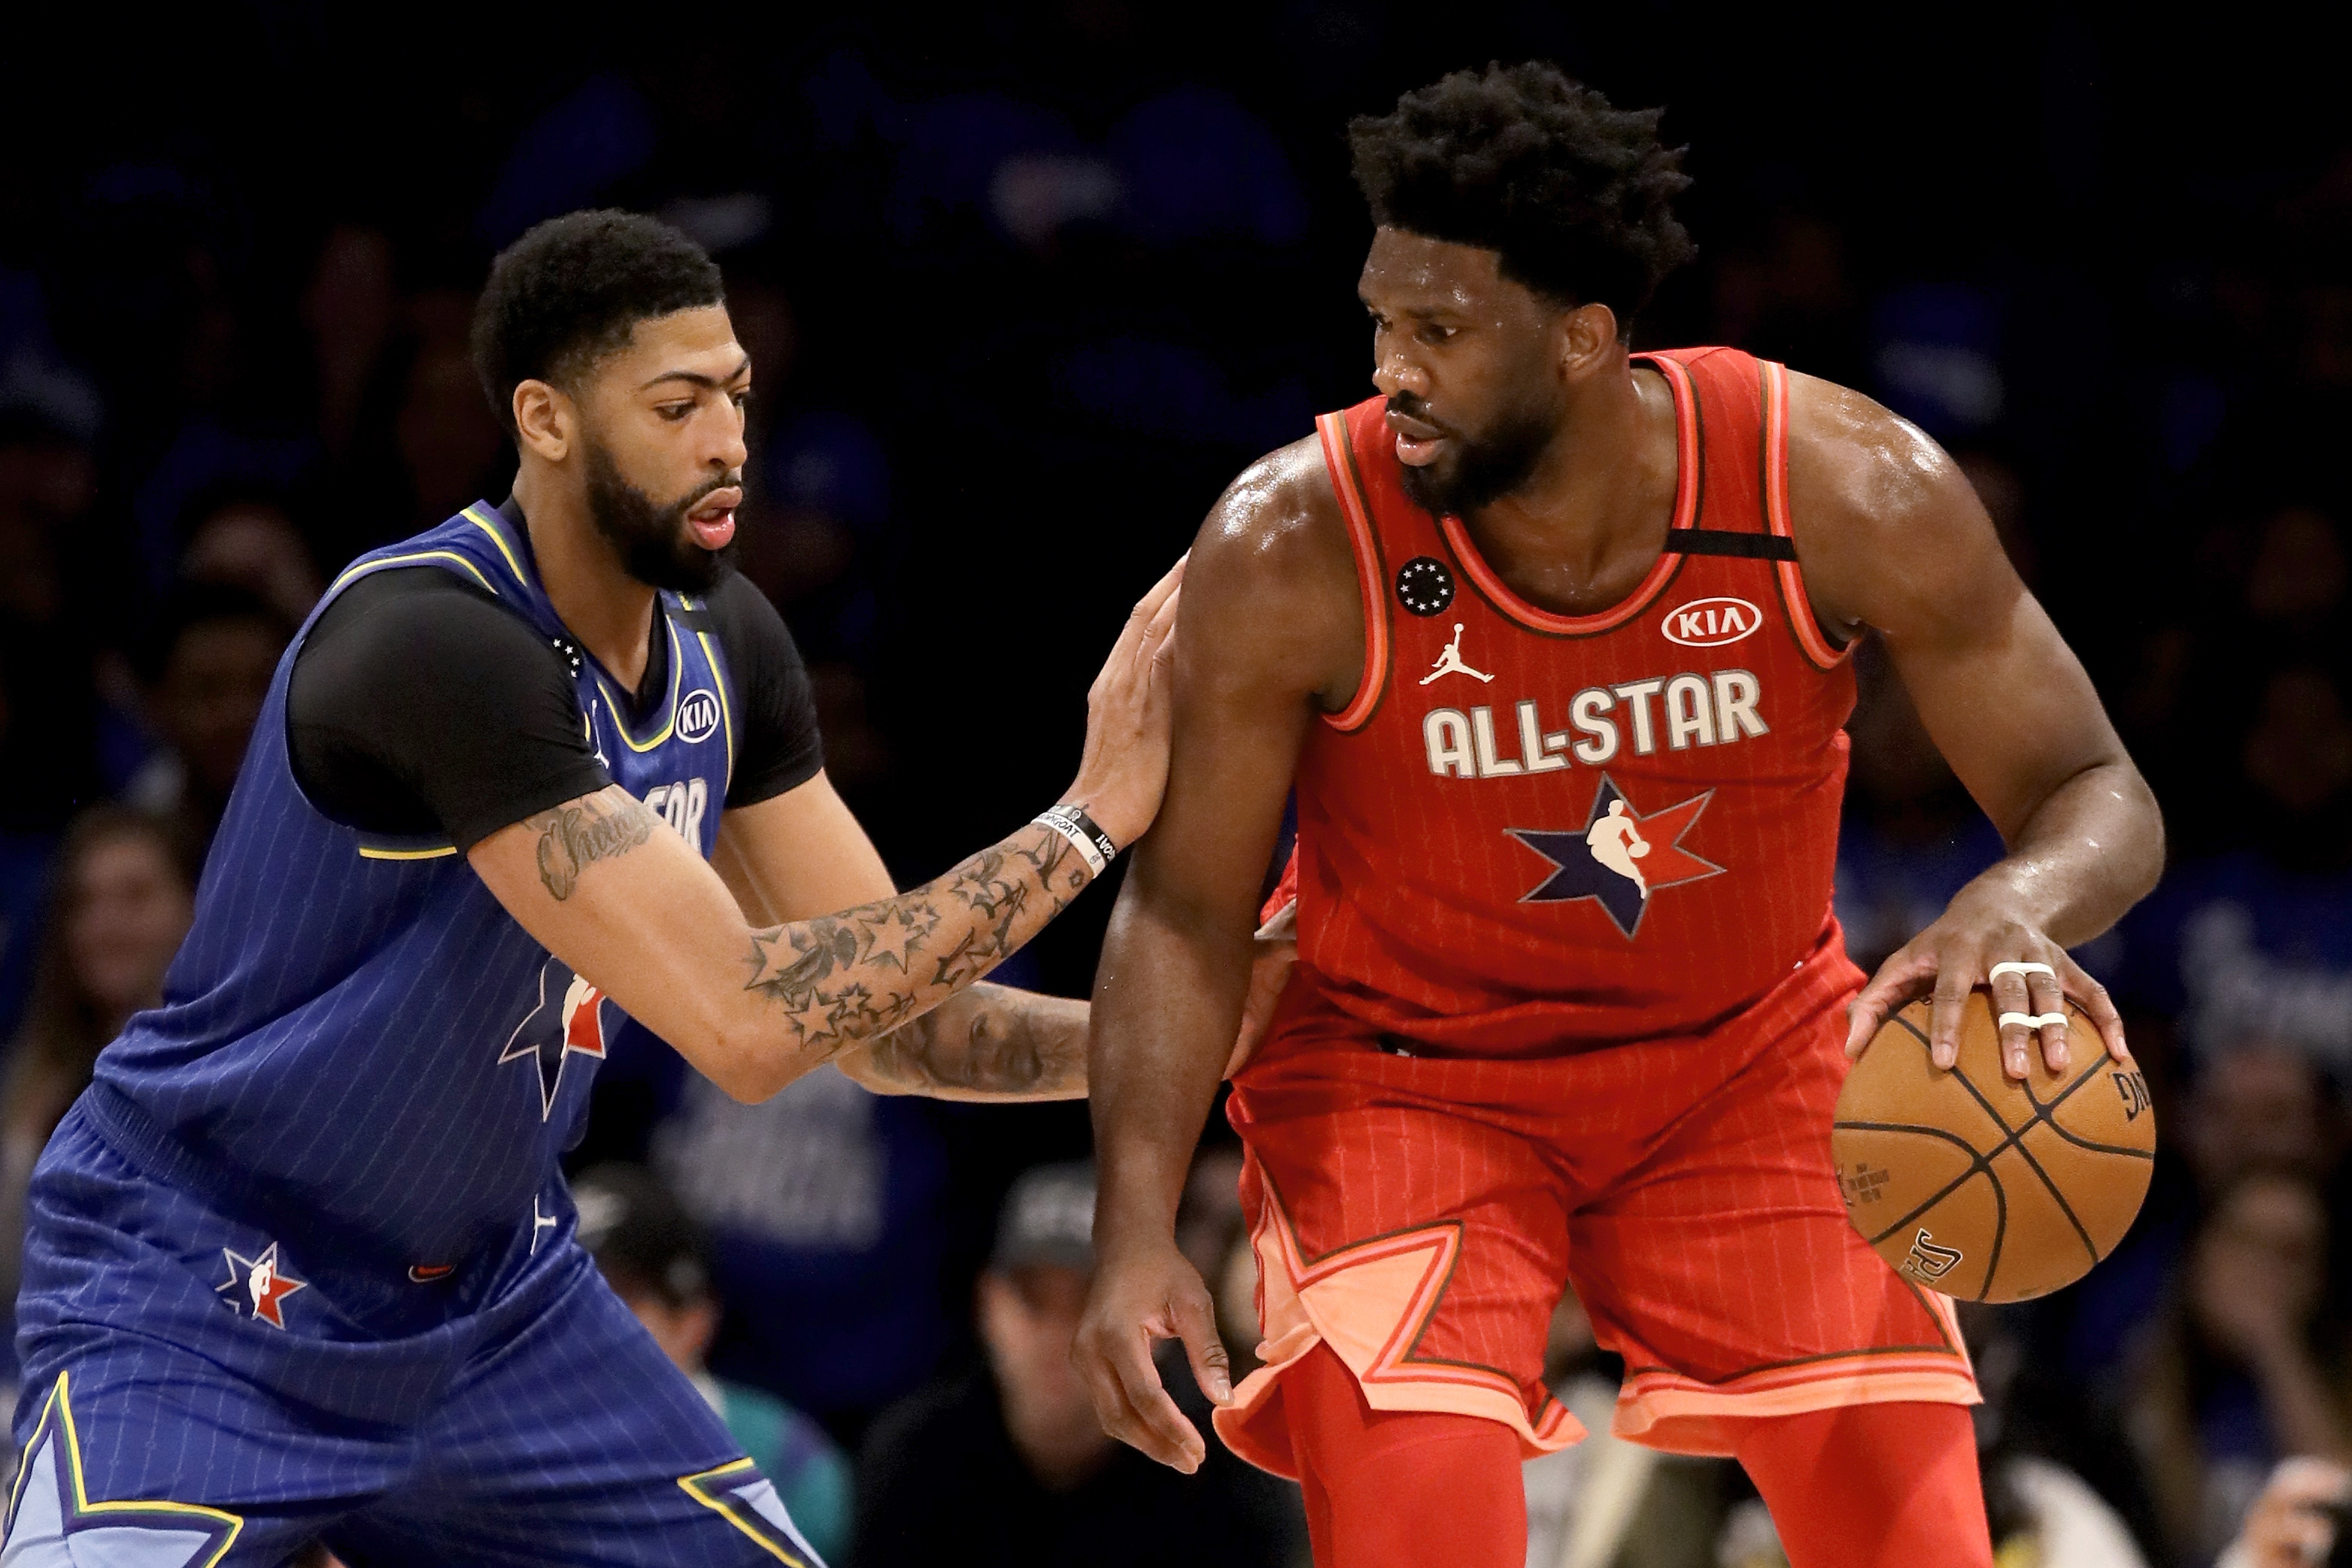 Elam Ending scoring system used to end NBA All-Star Game: How it works